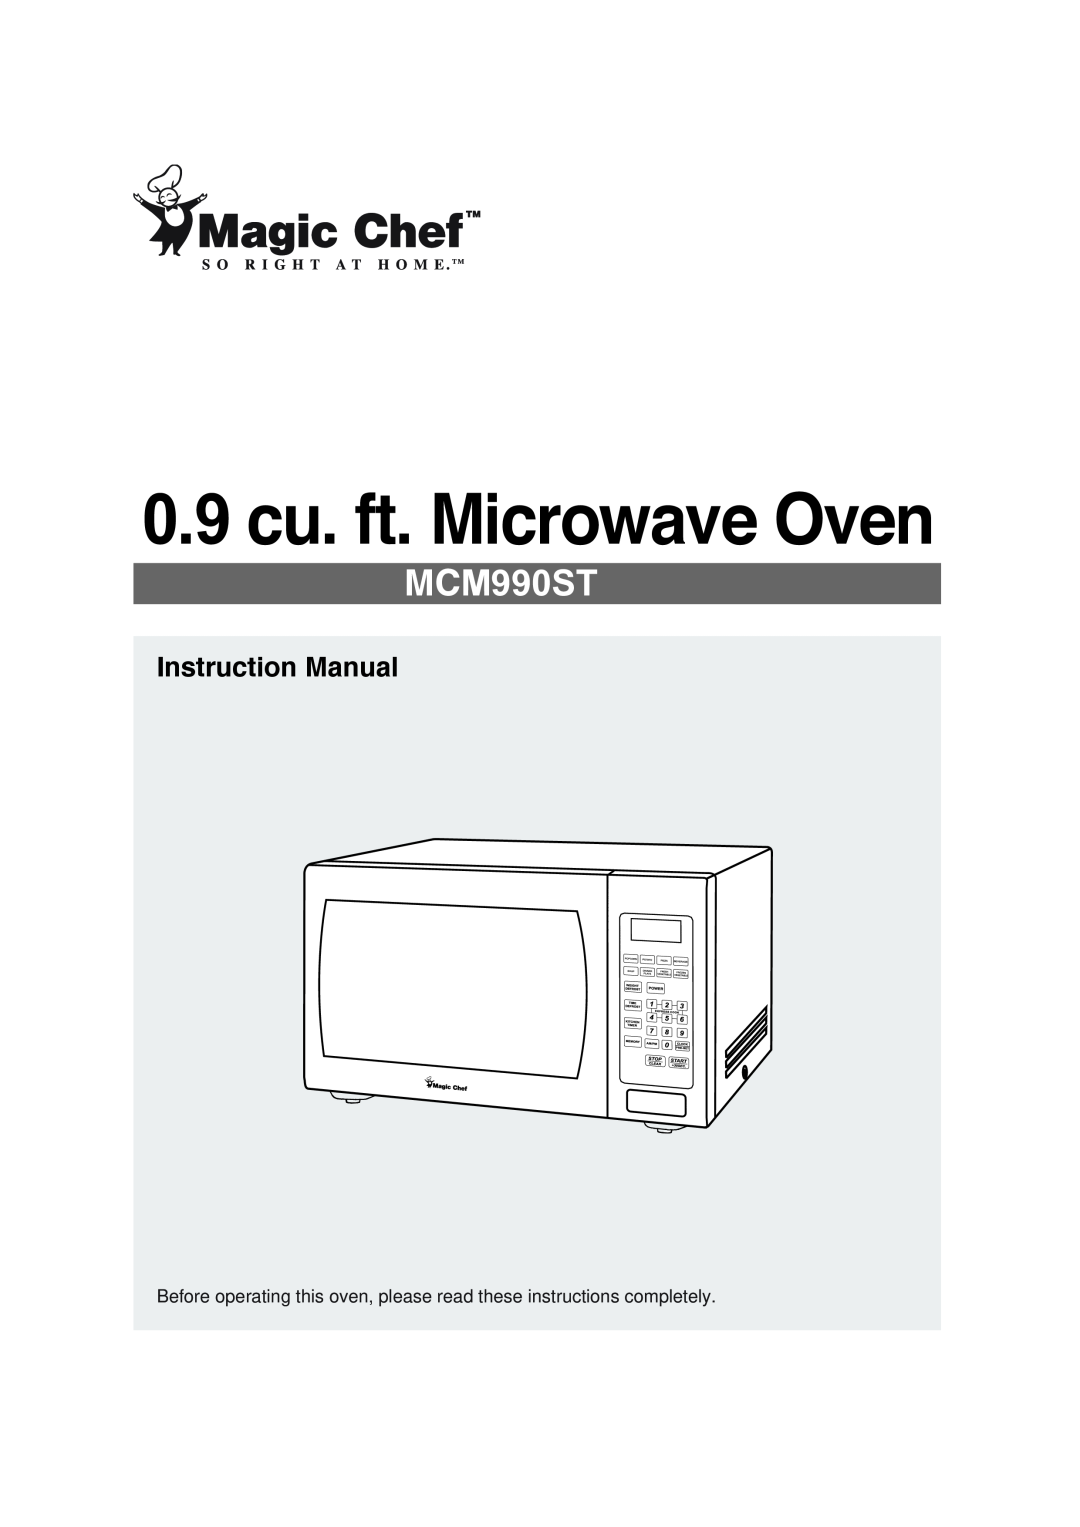 Magic Chef MCM990ST instruction manual 0.9 cu. ft. Microwave Oven 